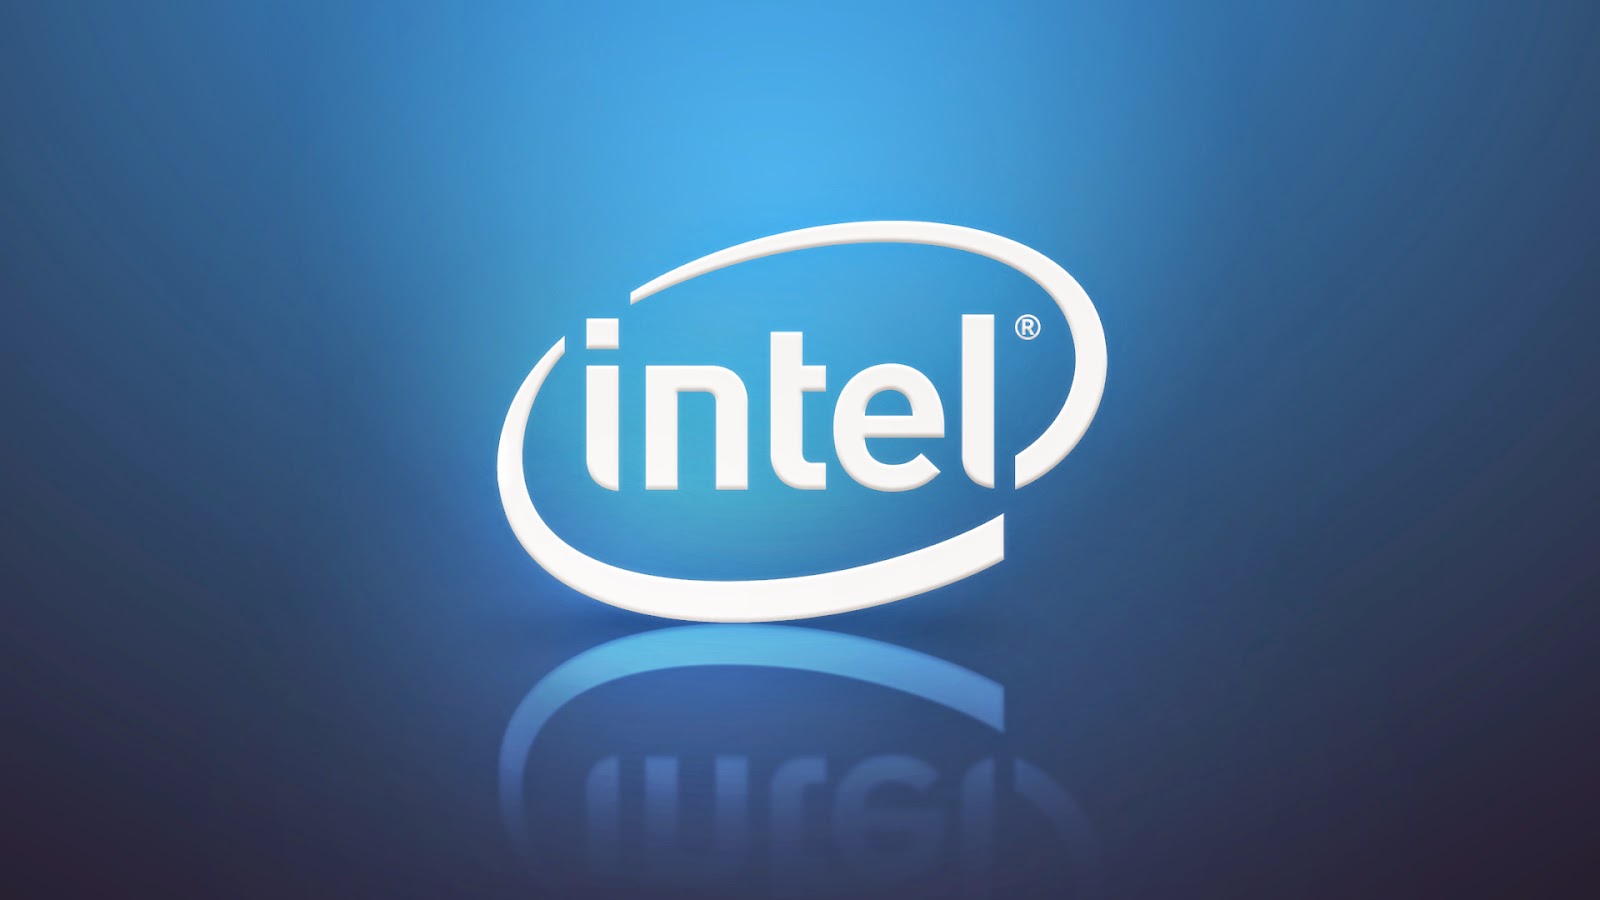  Microsoft release official fix for Intel Audio Driver “No Sound” issue due to Windows Update